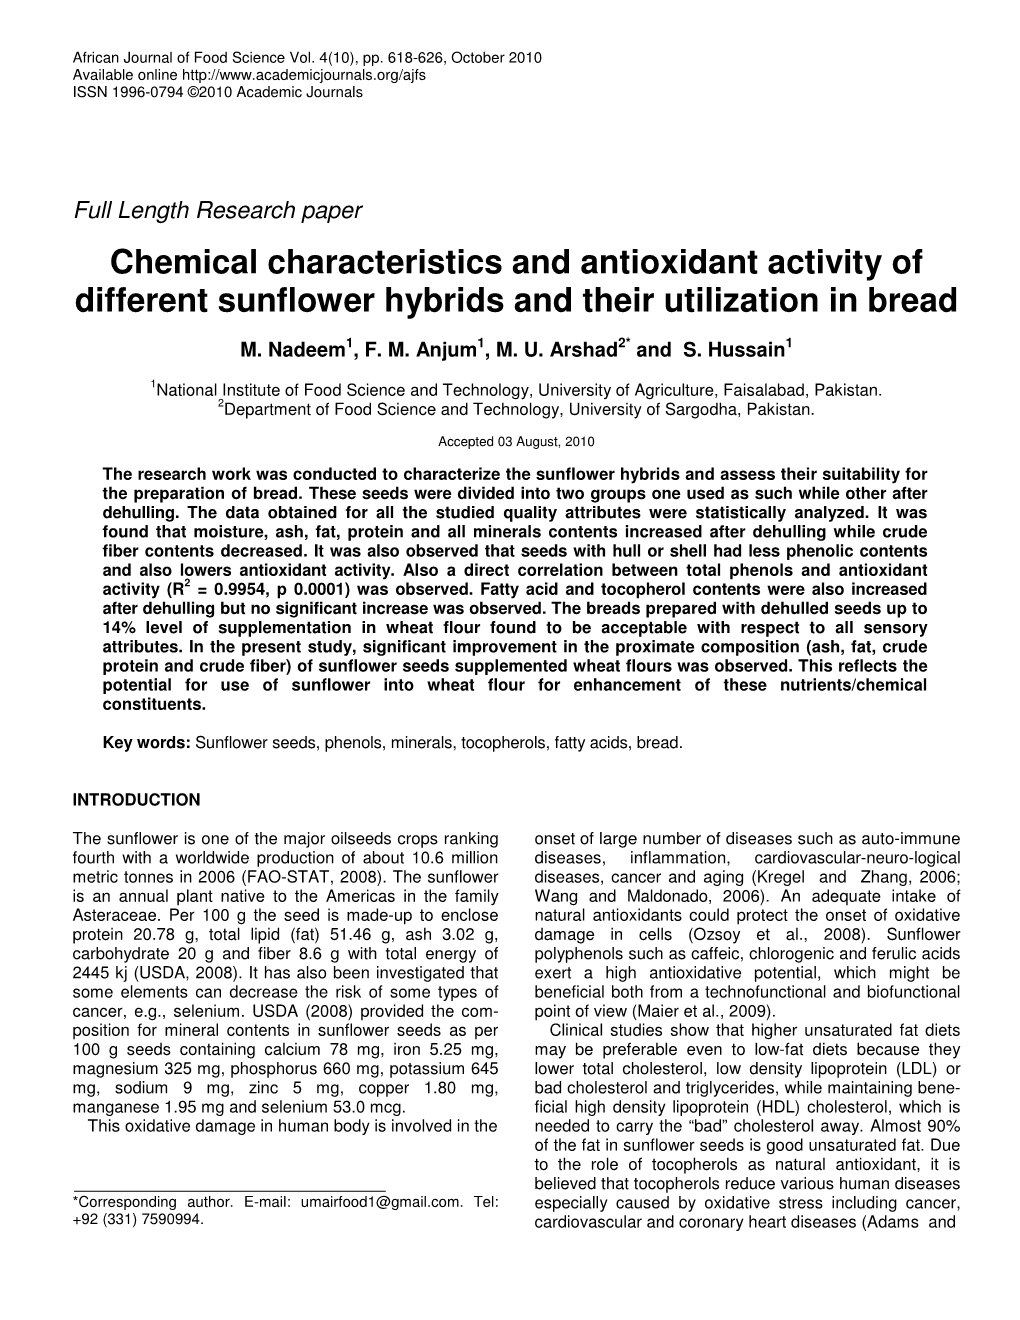 Chemical Characteristics and Antioxidant Activity of Different Sunflower Hybrids and Their Utilization in Bread